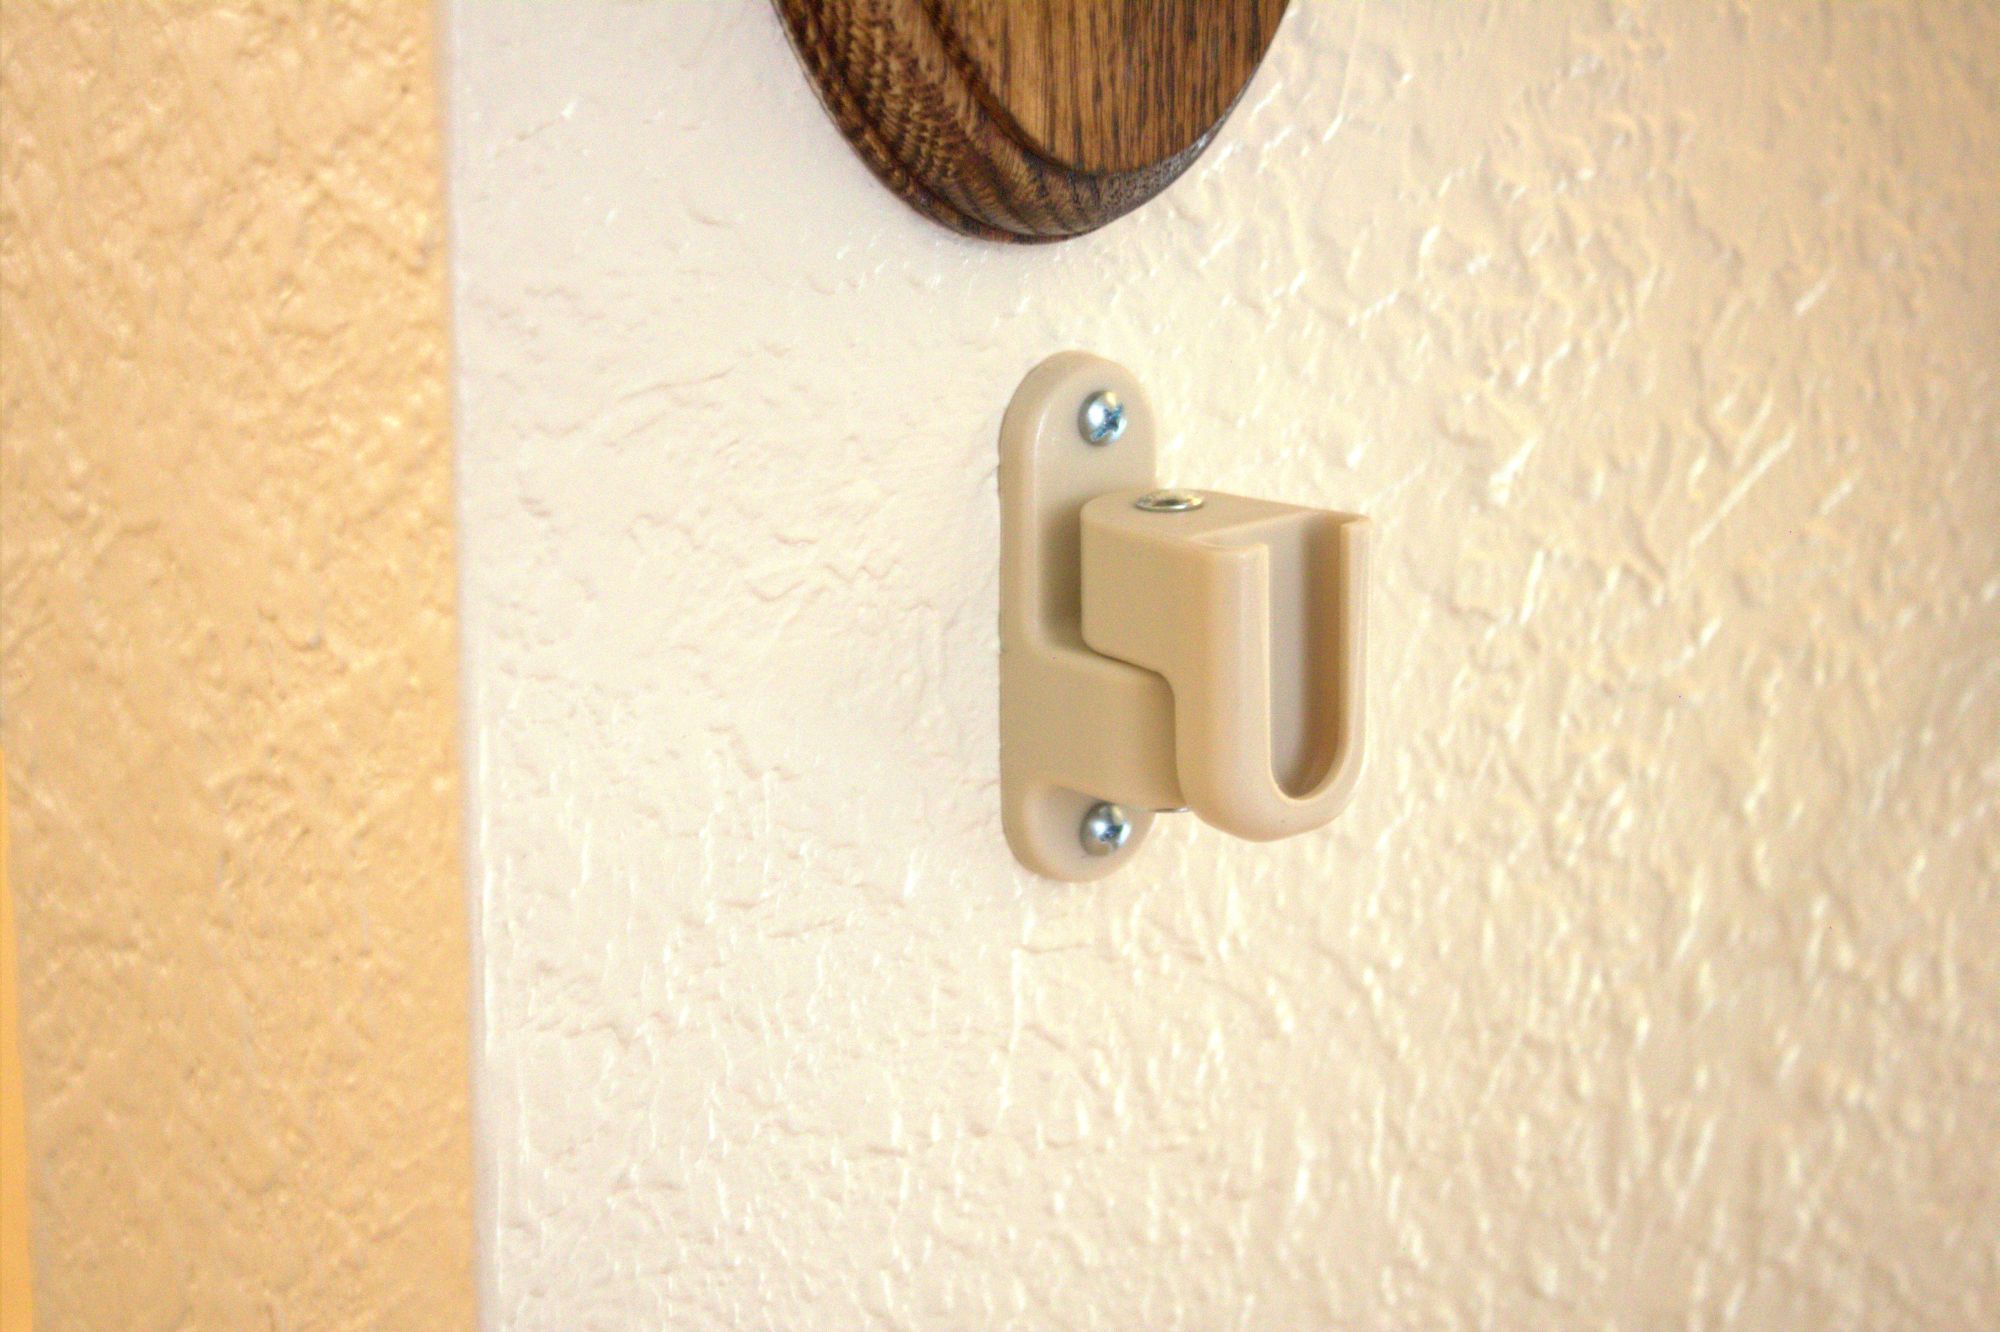 The Baby Gate Hinge Located At The Top Of The Stairs